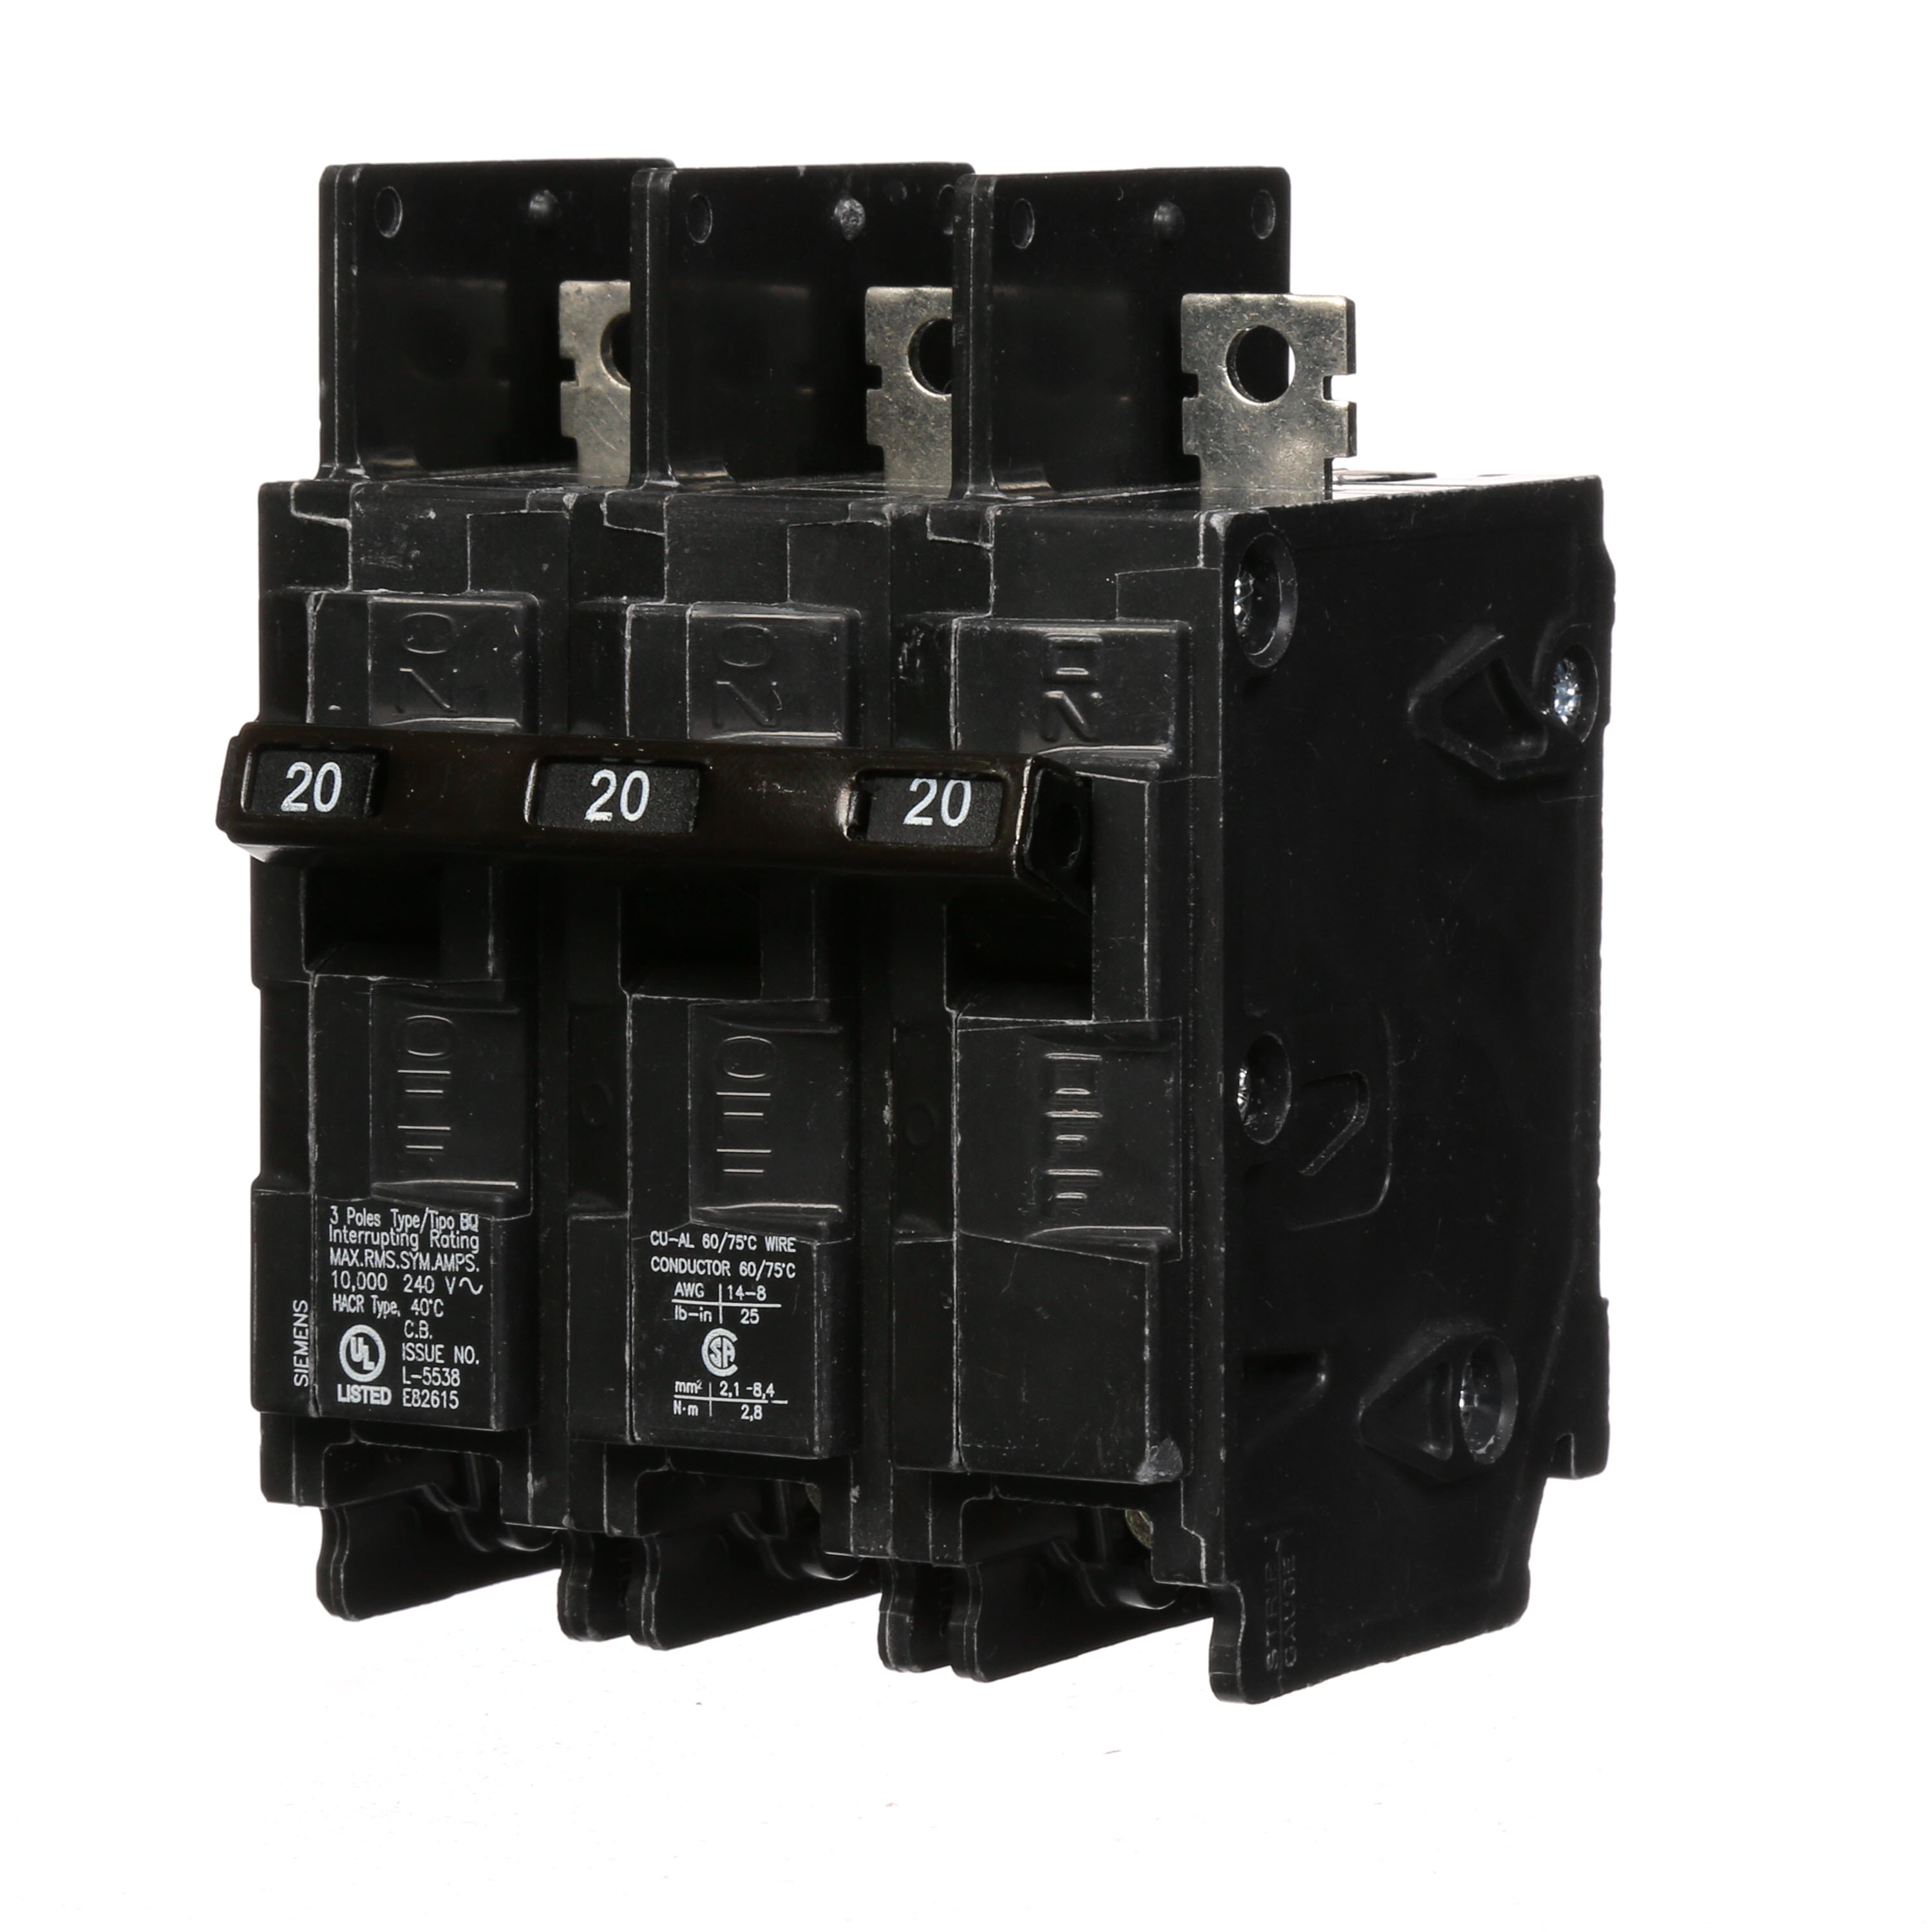 Siemens Low Voltage Molded Case Circuit Breakers General Purpose MCCBs are Circuit Protection Molded Case Circuit Breakers. 3-Pole Common-Trip circuit breaker type BQ. Rated 240V (020A) (AIR 10 kA). Special features Load side lugs are included.